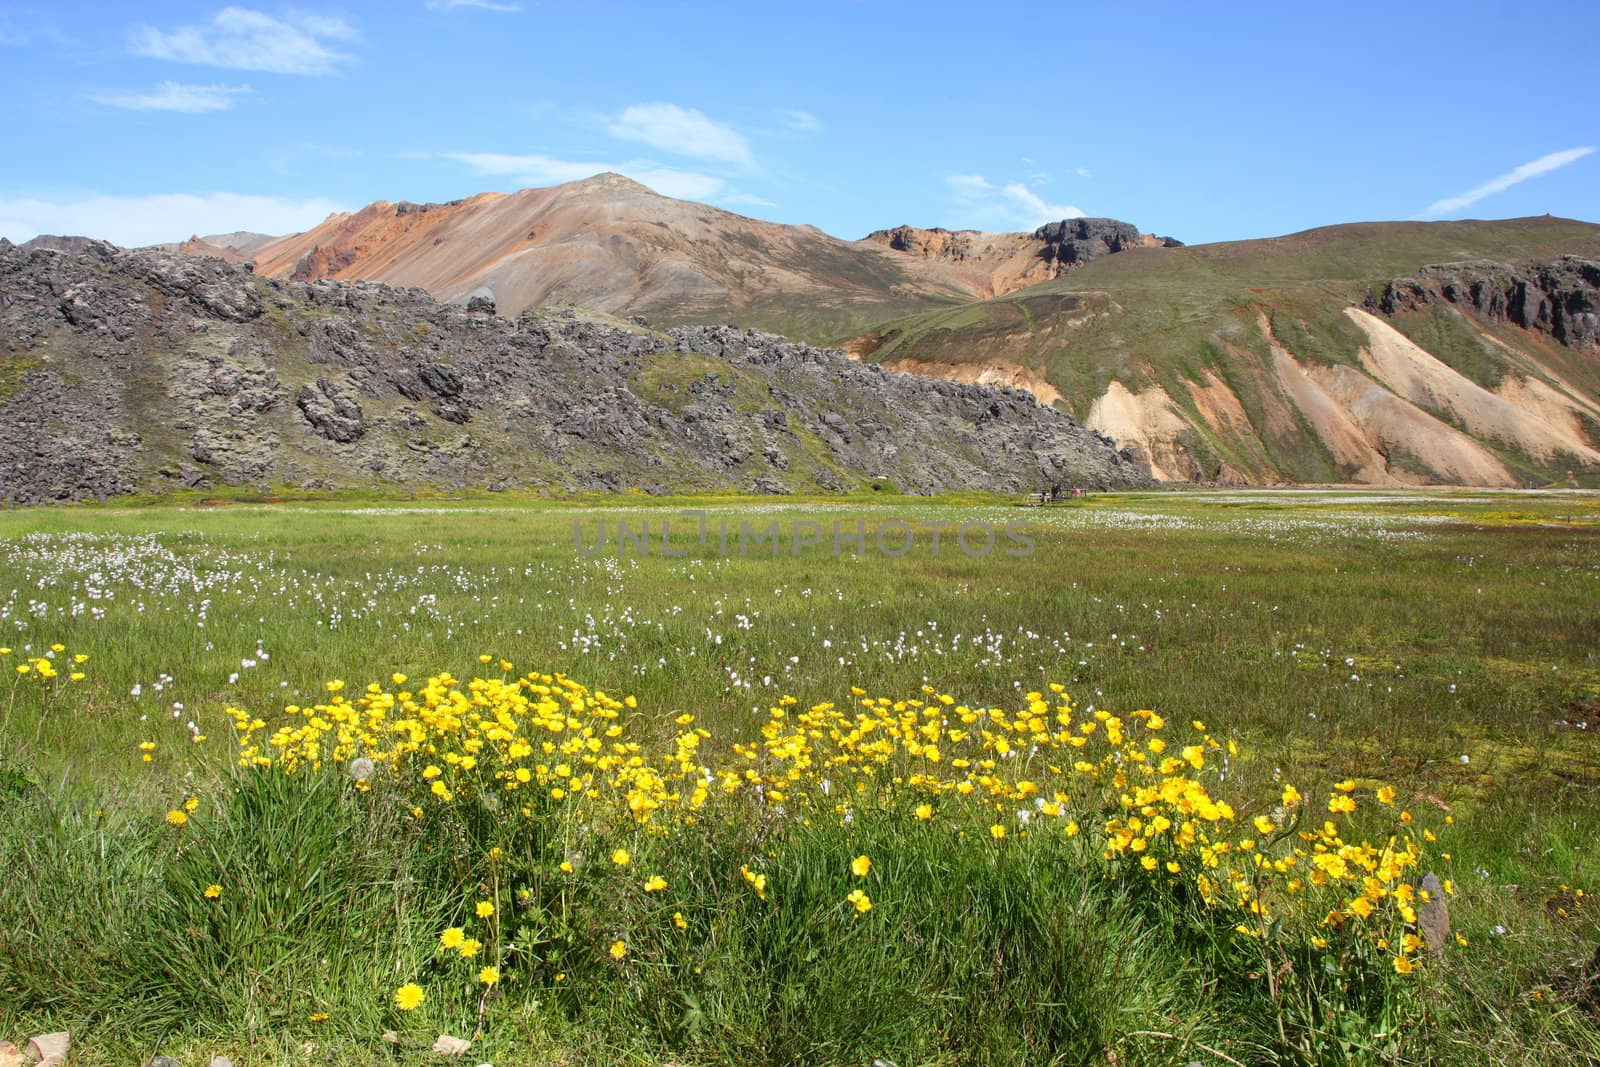 Iceland. Beautiful mountains and yellow flowers. Famous volcanic area with rhyolite rocks - Landmannalaugar.